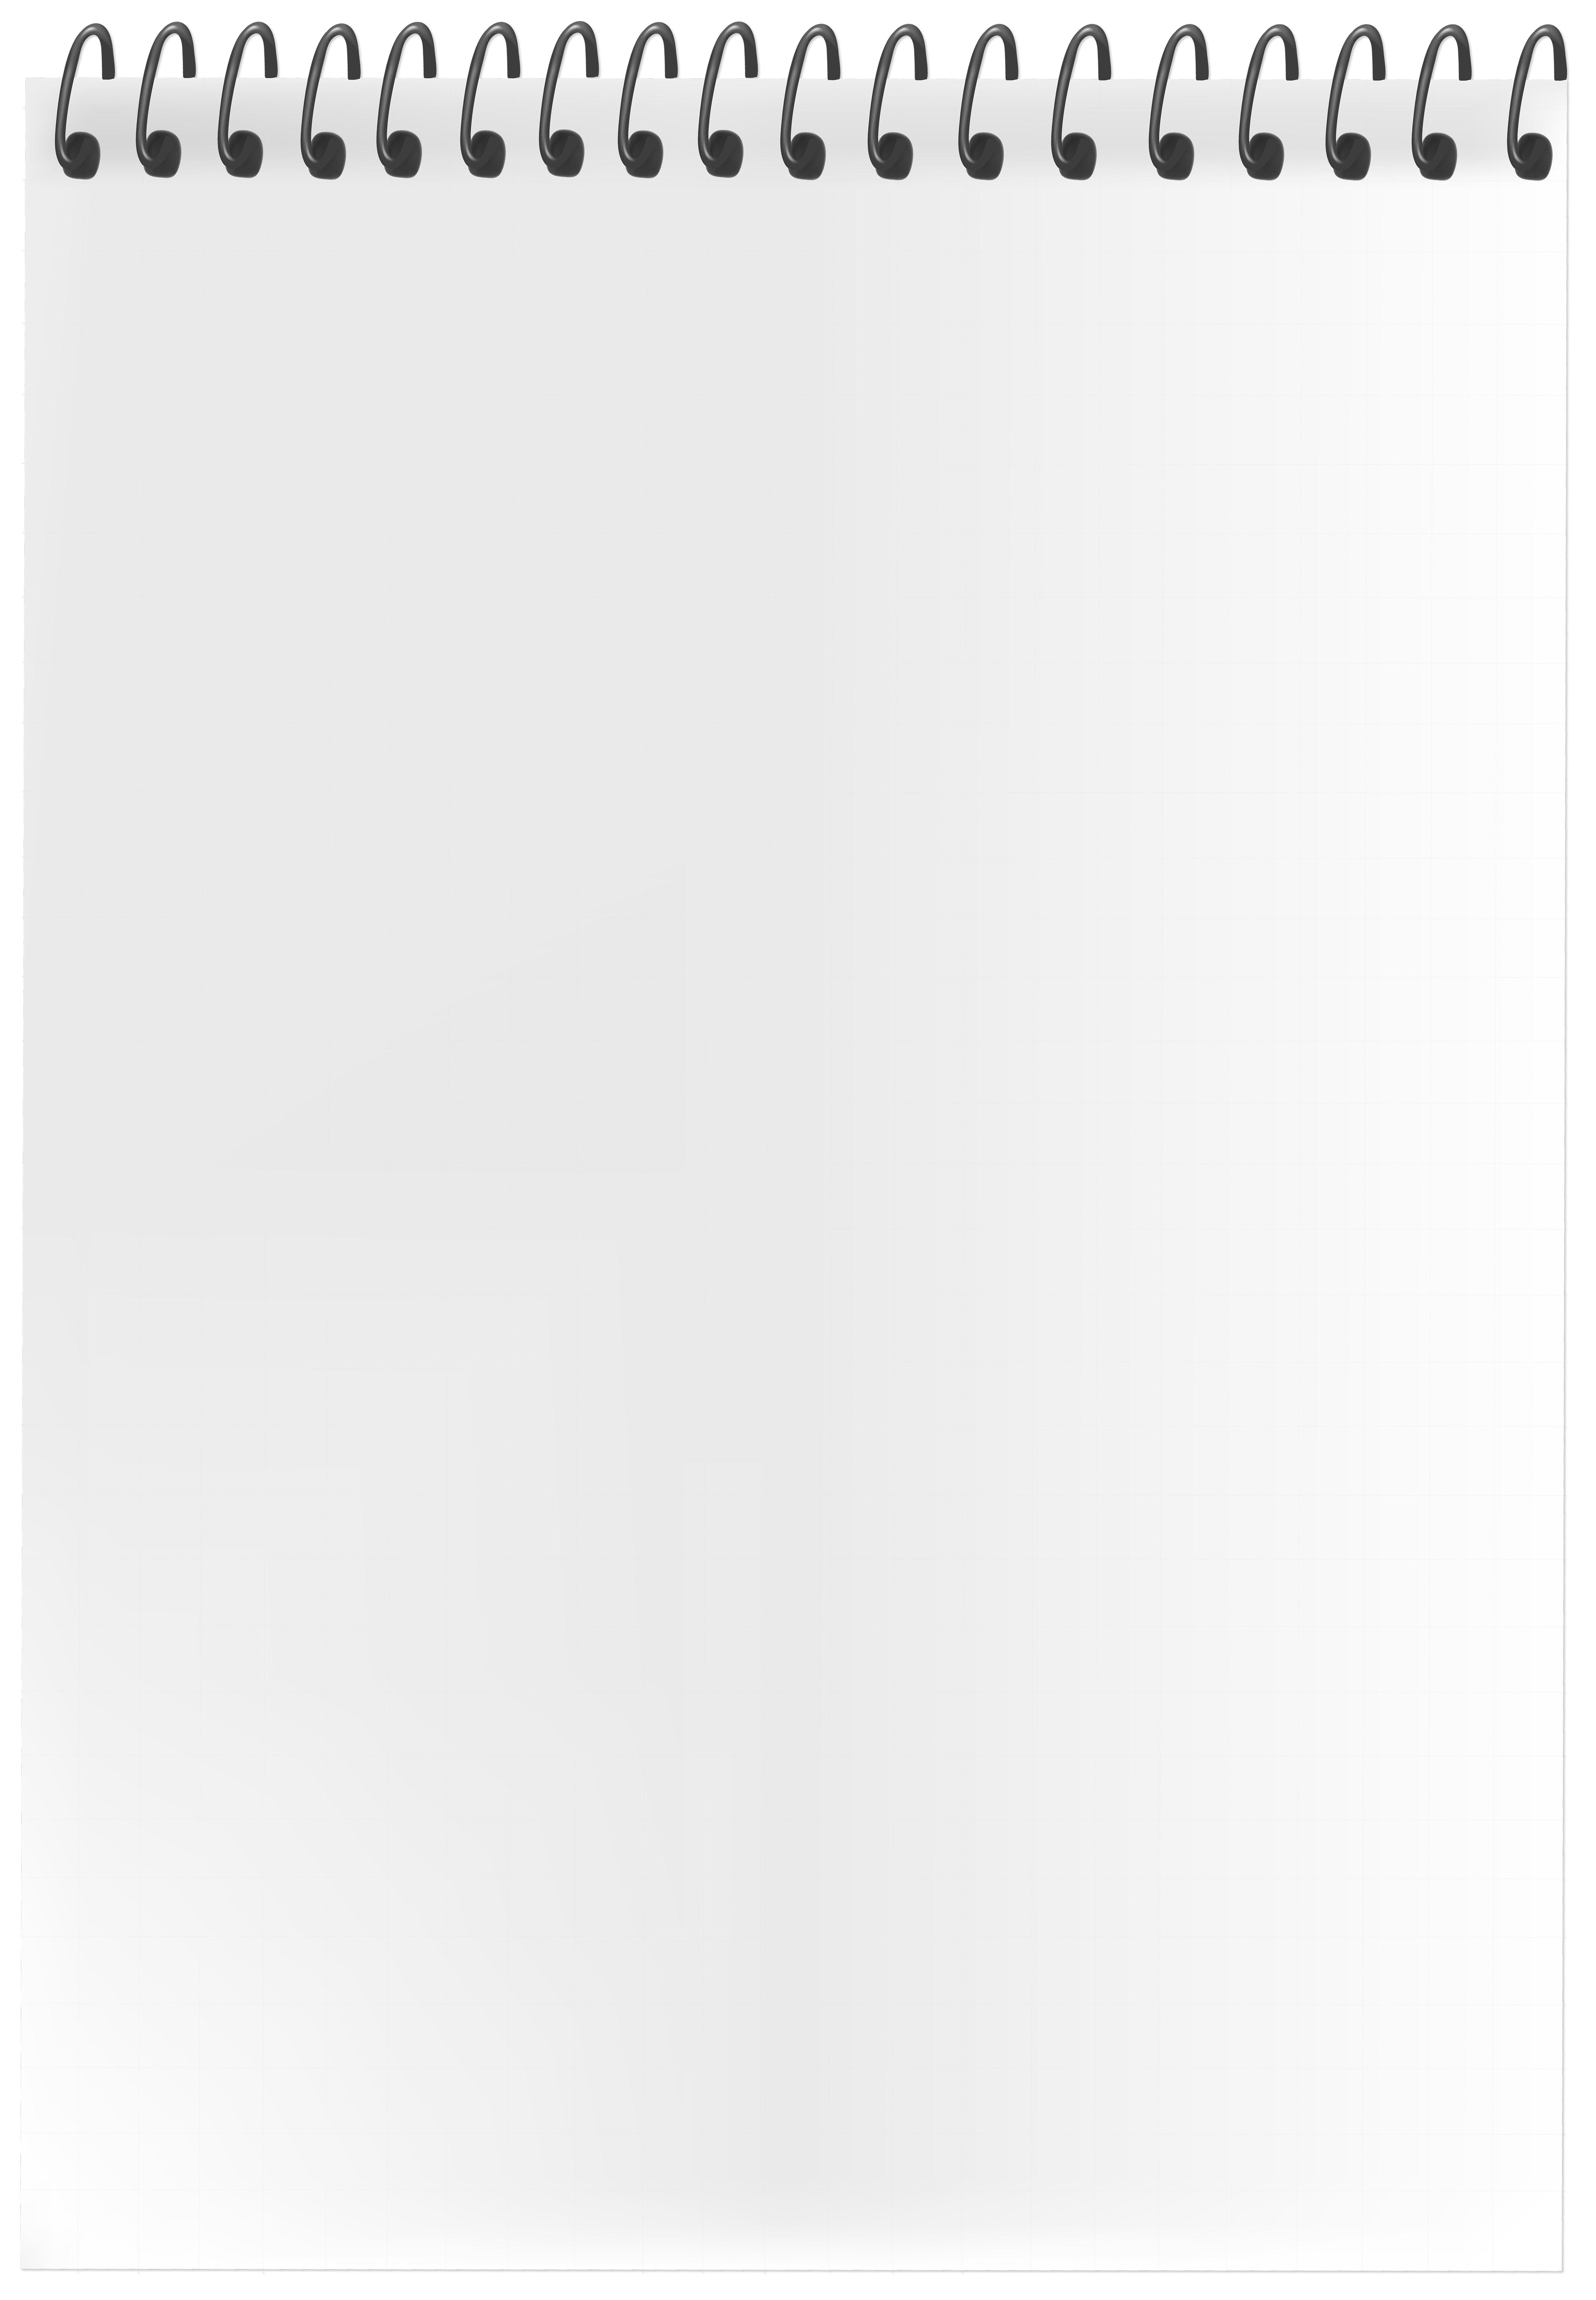 Spiral Blank Page PNG Clip Art Image Quality Image And Transparent PNG Free Clipart